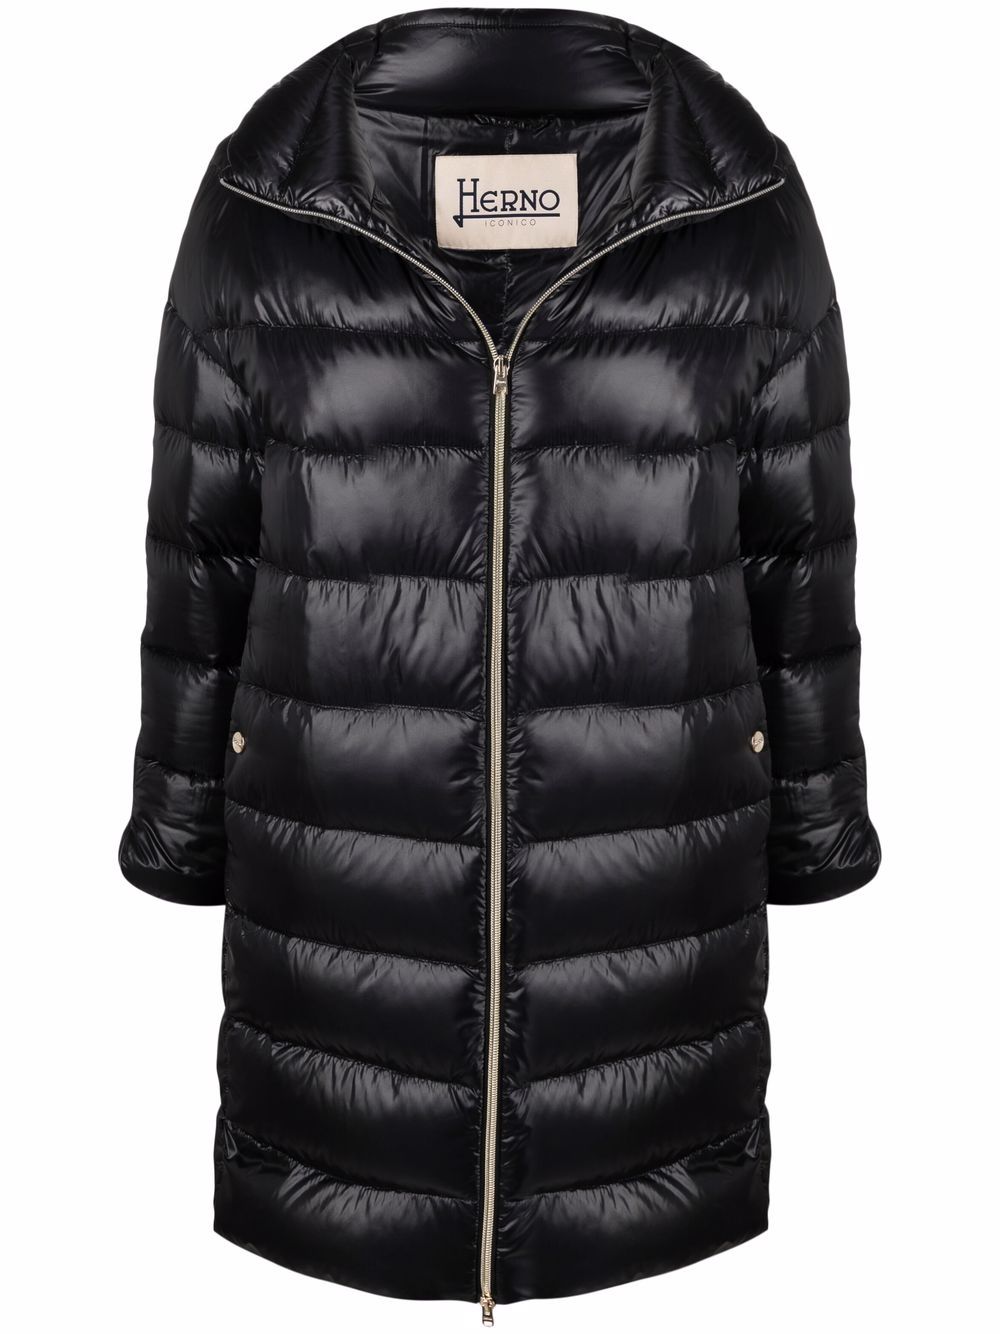 Image 1 of Herno padded zip-up coat